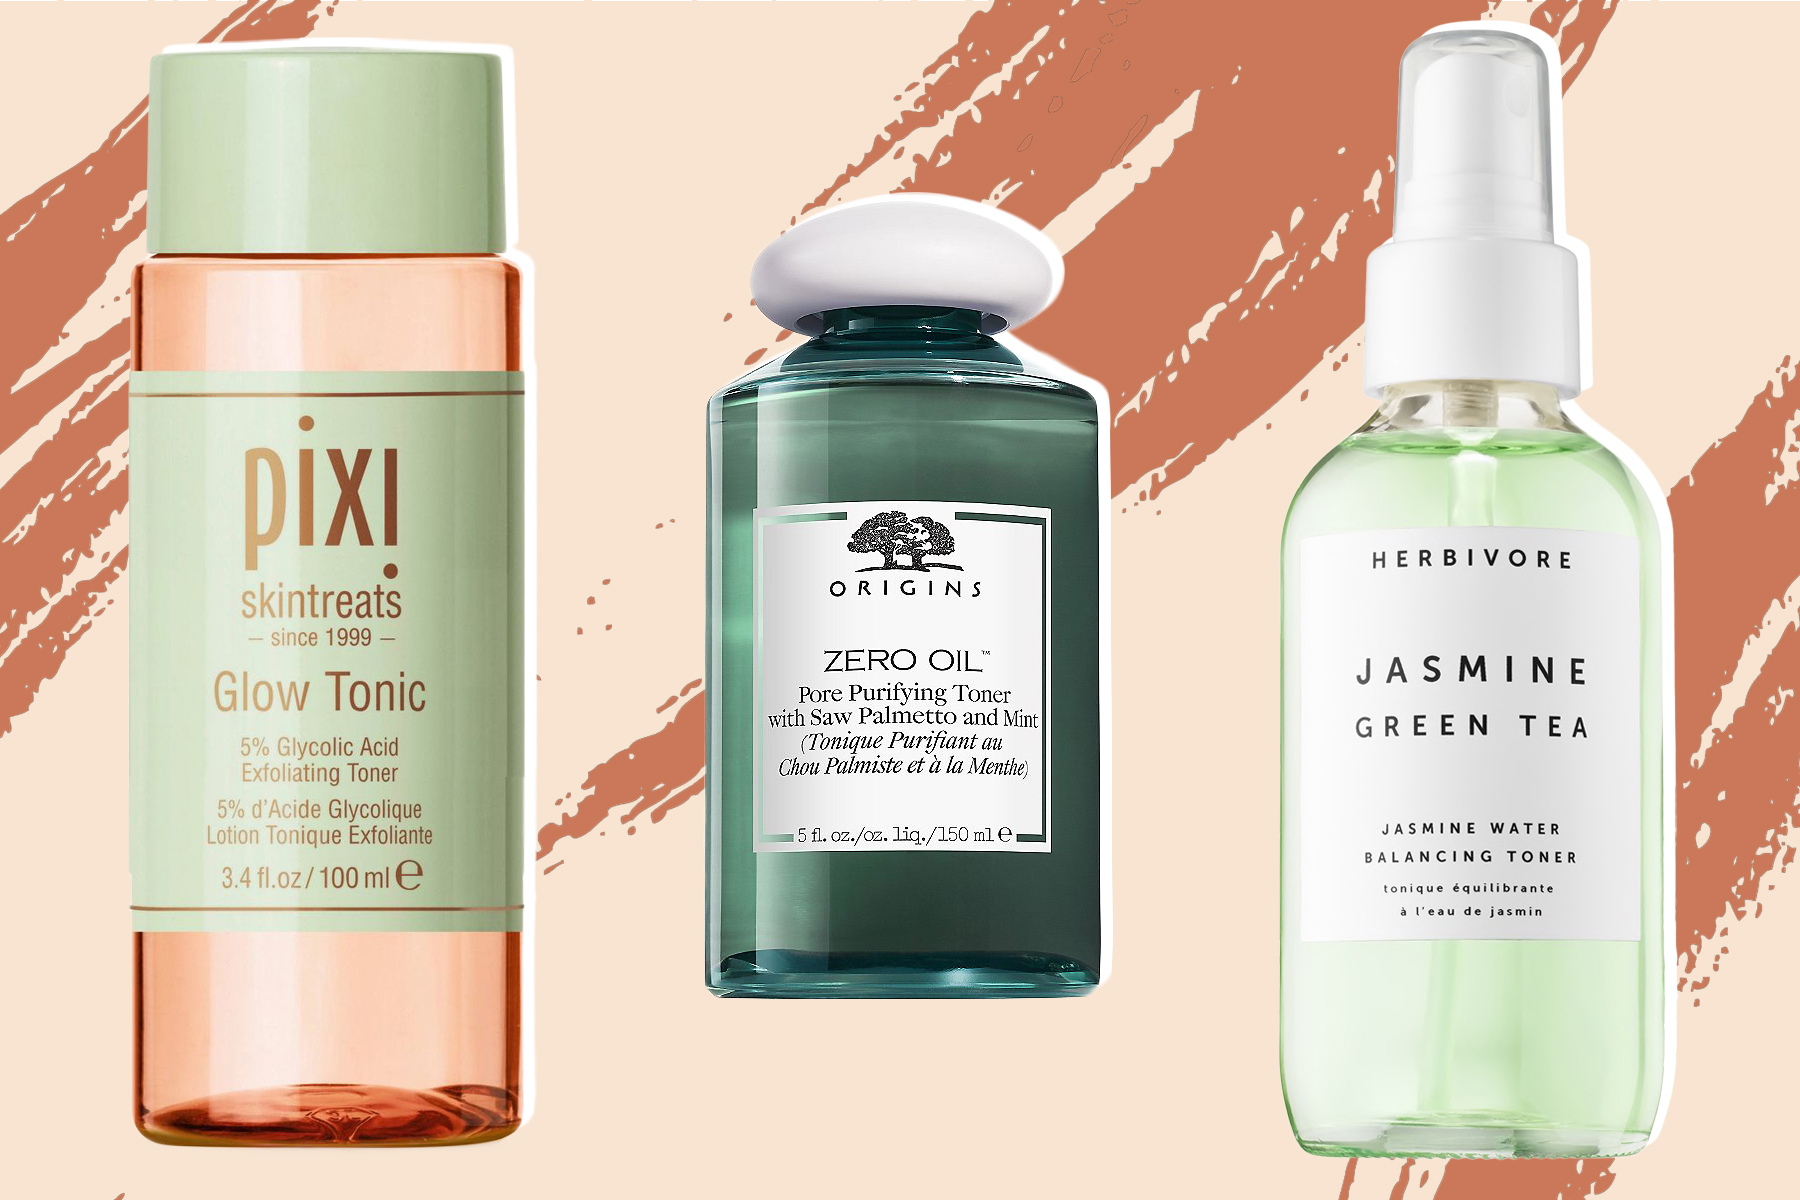 6 Best Toners For Oily Skin Toners For People With Oily SkinHelloGiggles